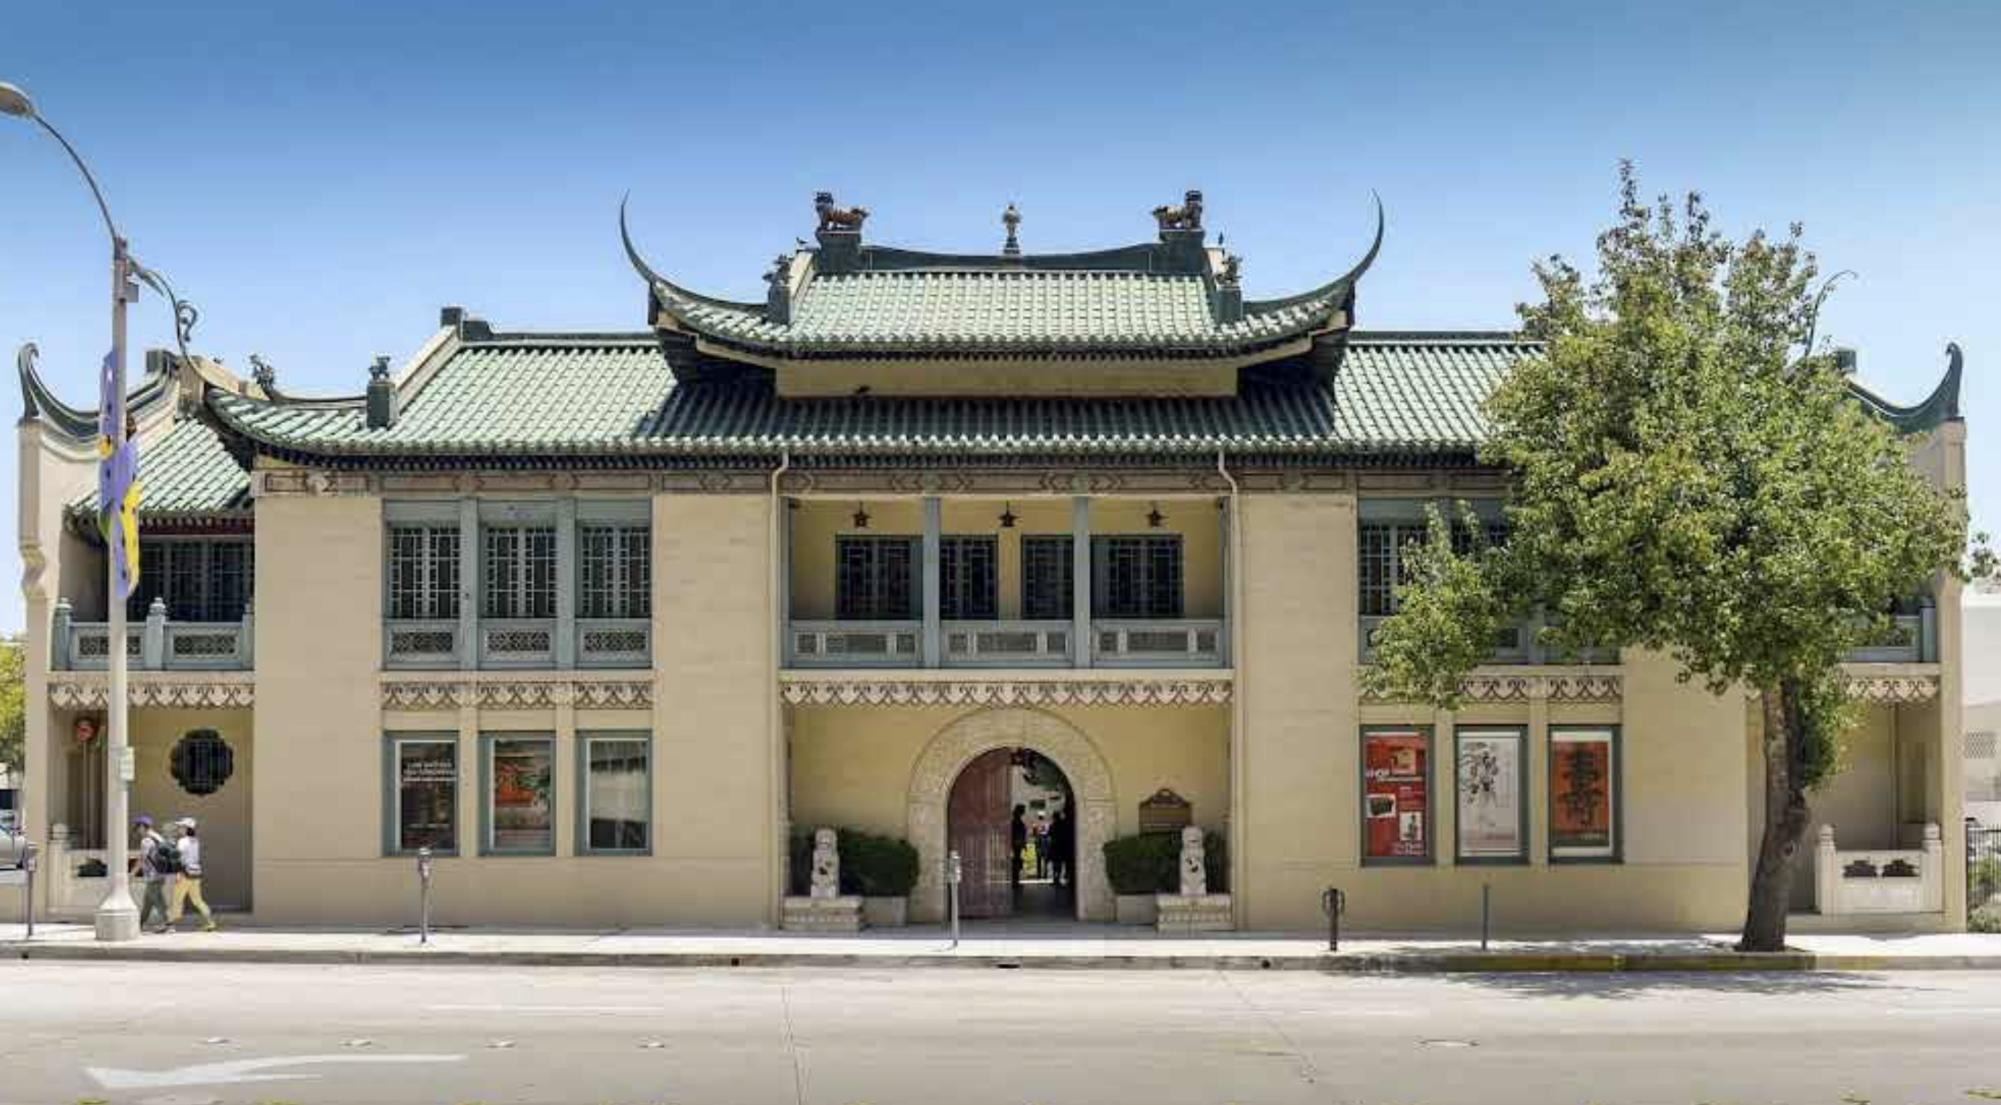 The USC Pacific Asian Museum is home to some of the most unique cultural experiences you can find around Los Angeles this Lunar New Years weekend.